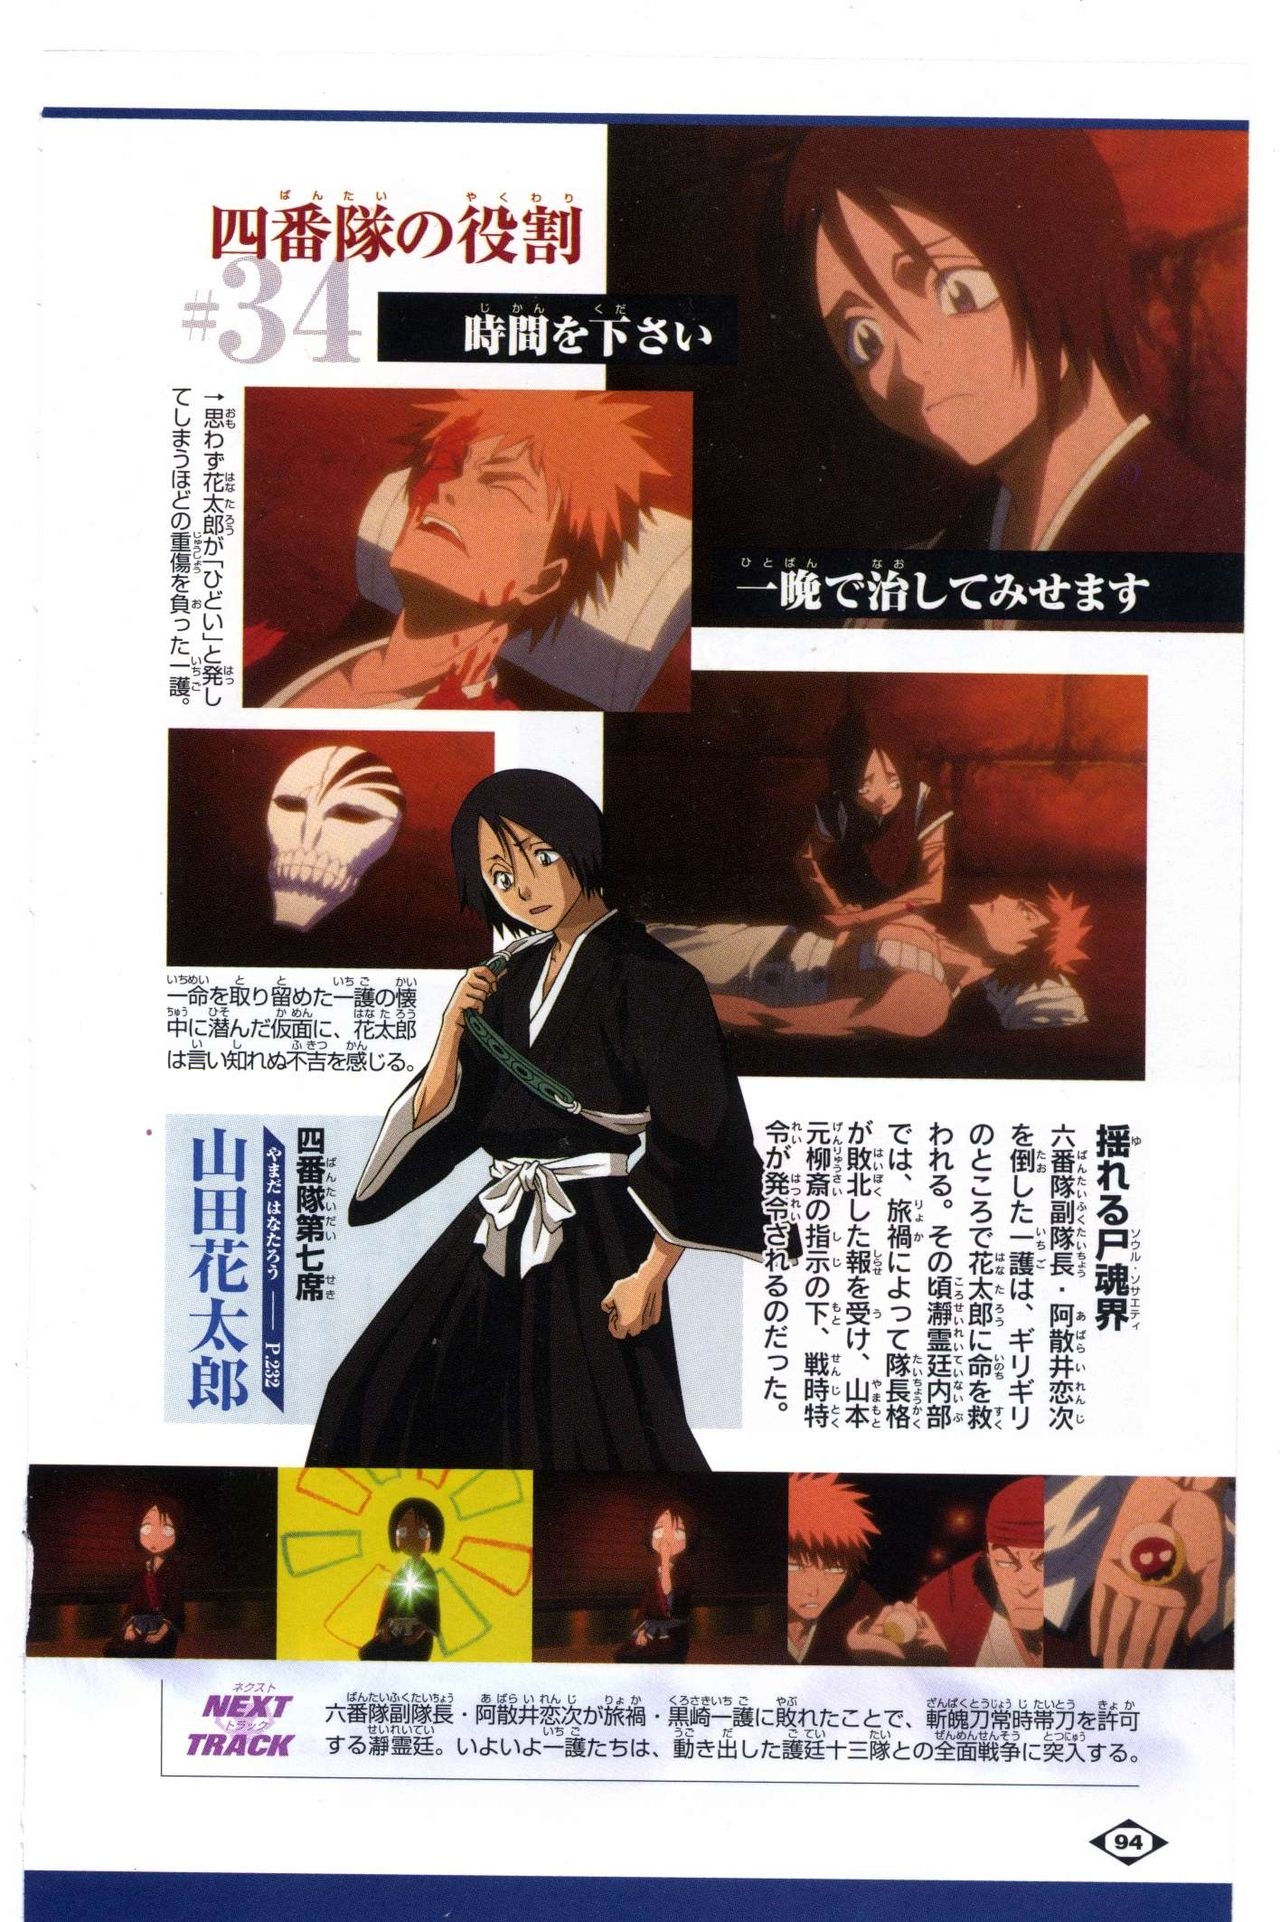 Bleach: Official Animation Book VIBEs 94